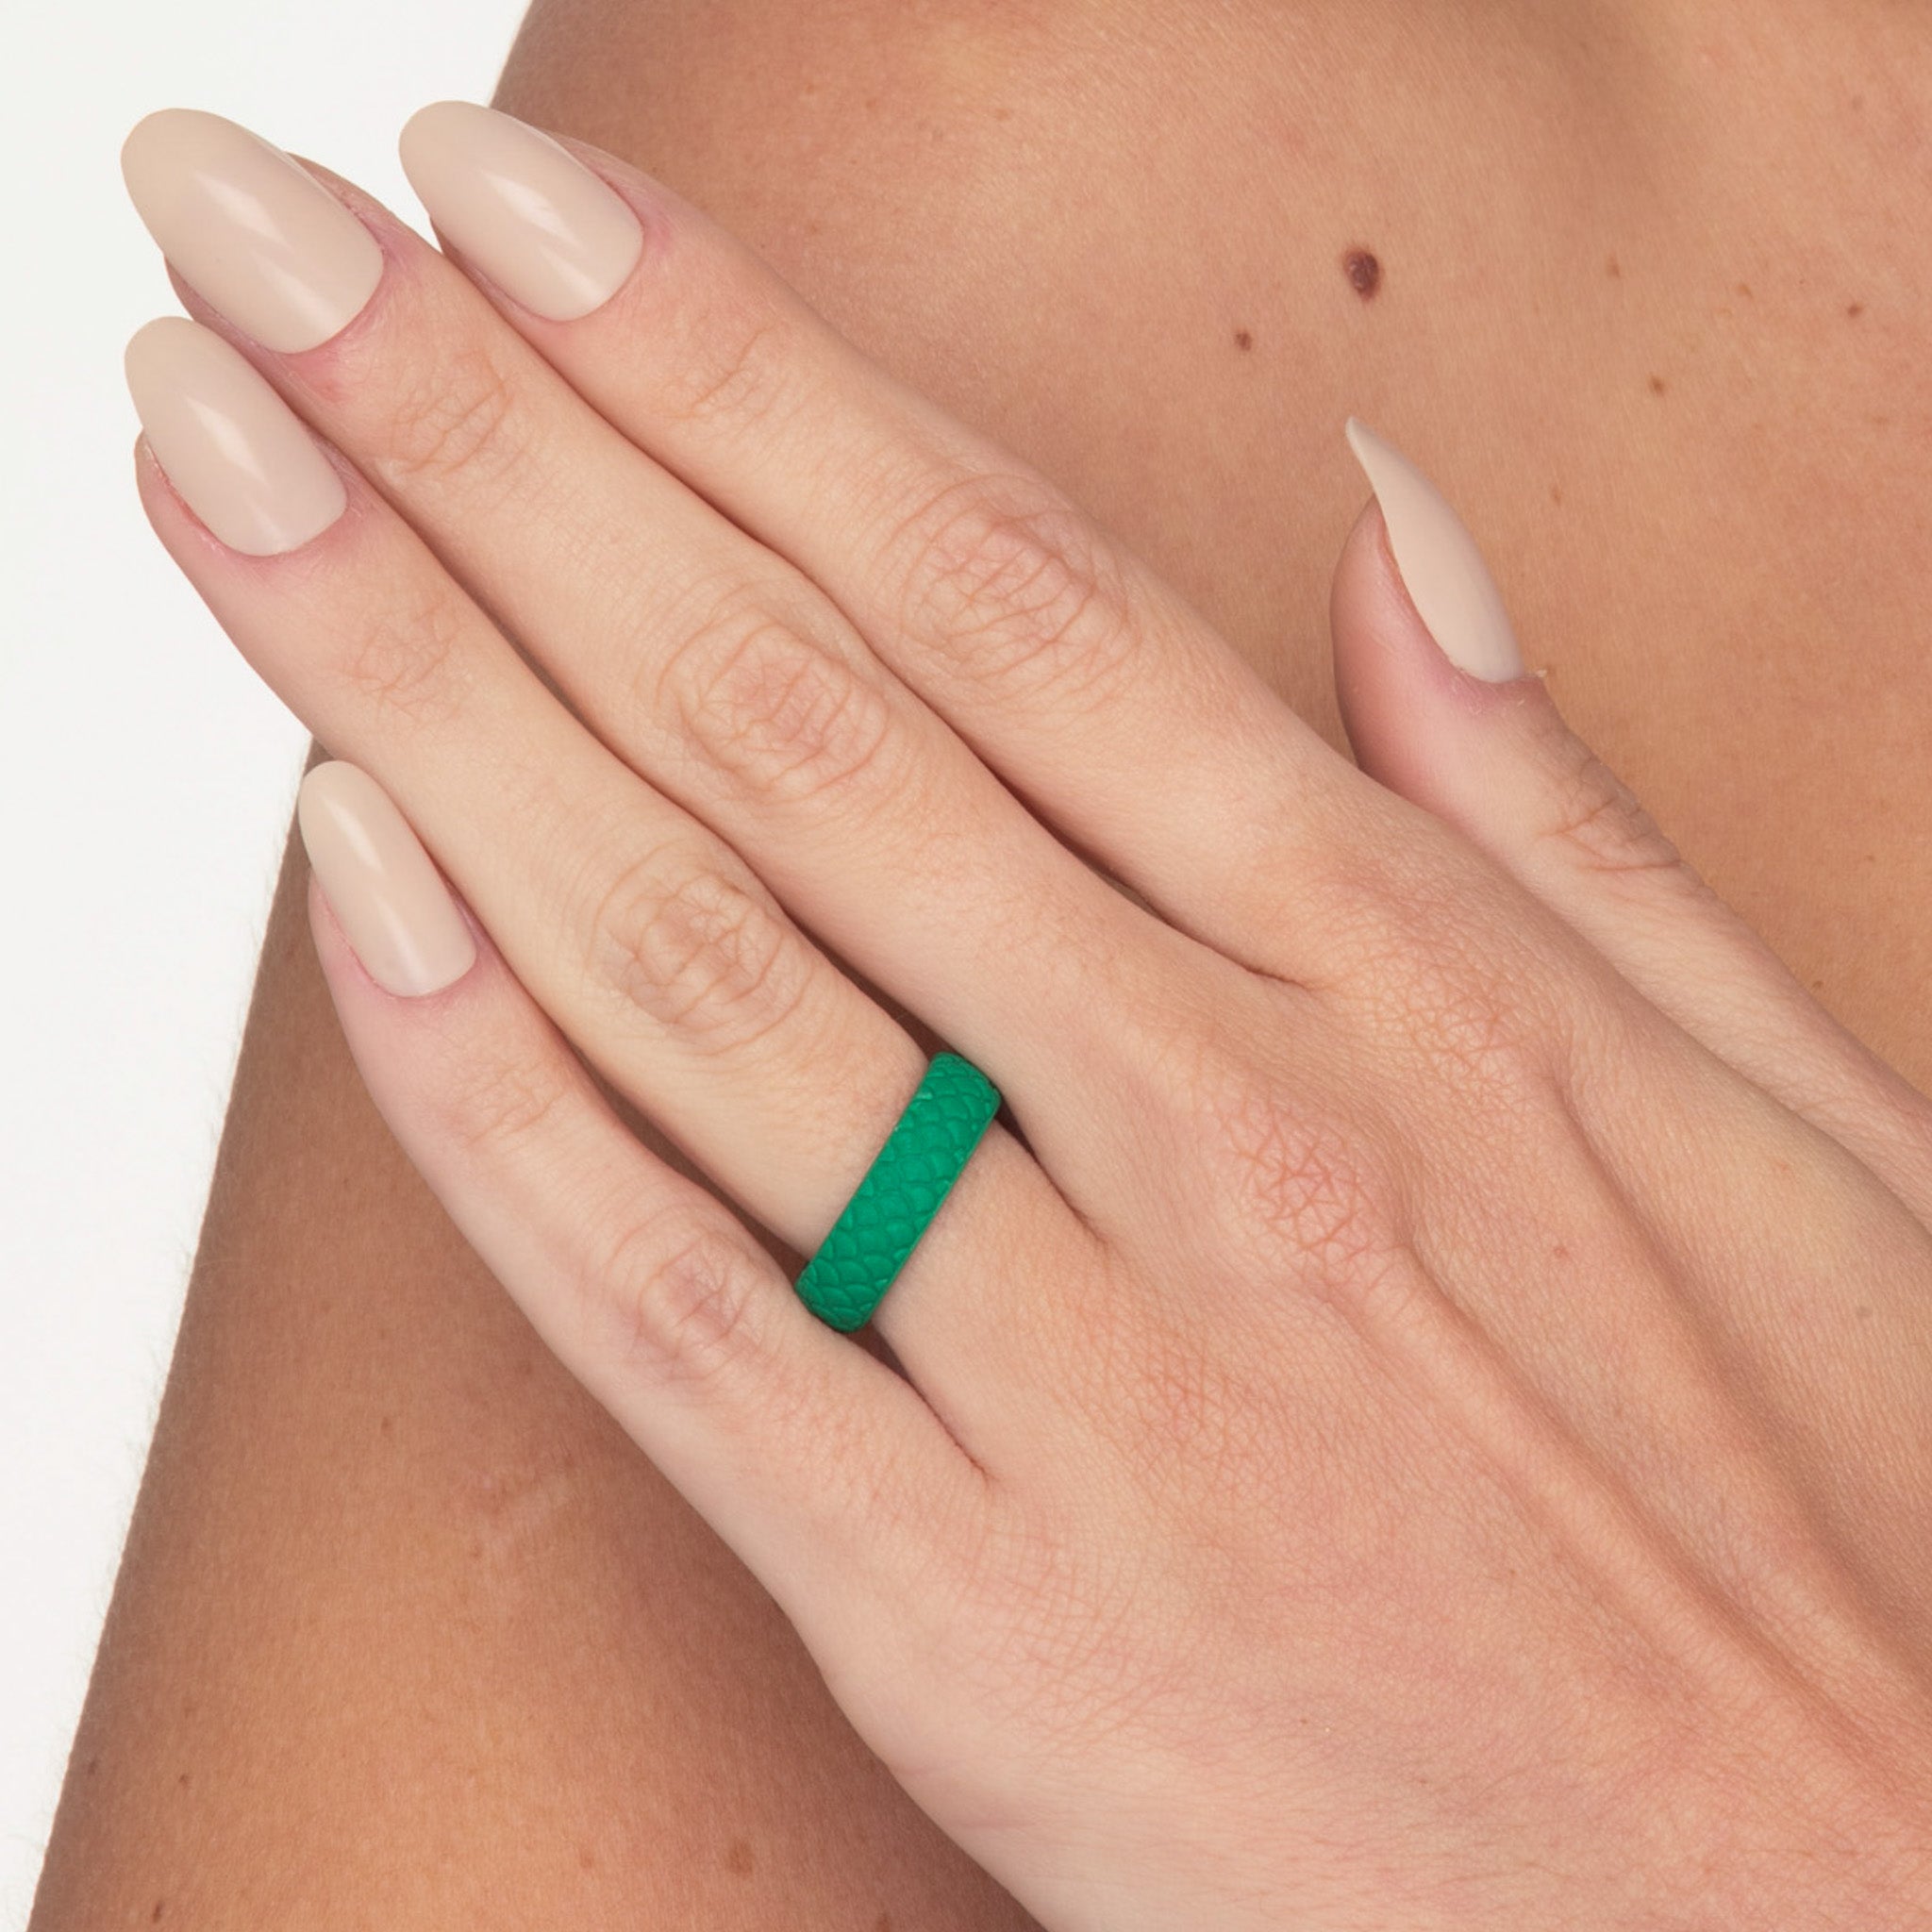 The Mermaid's Whisper - Silicone Ring